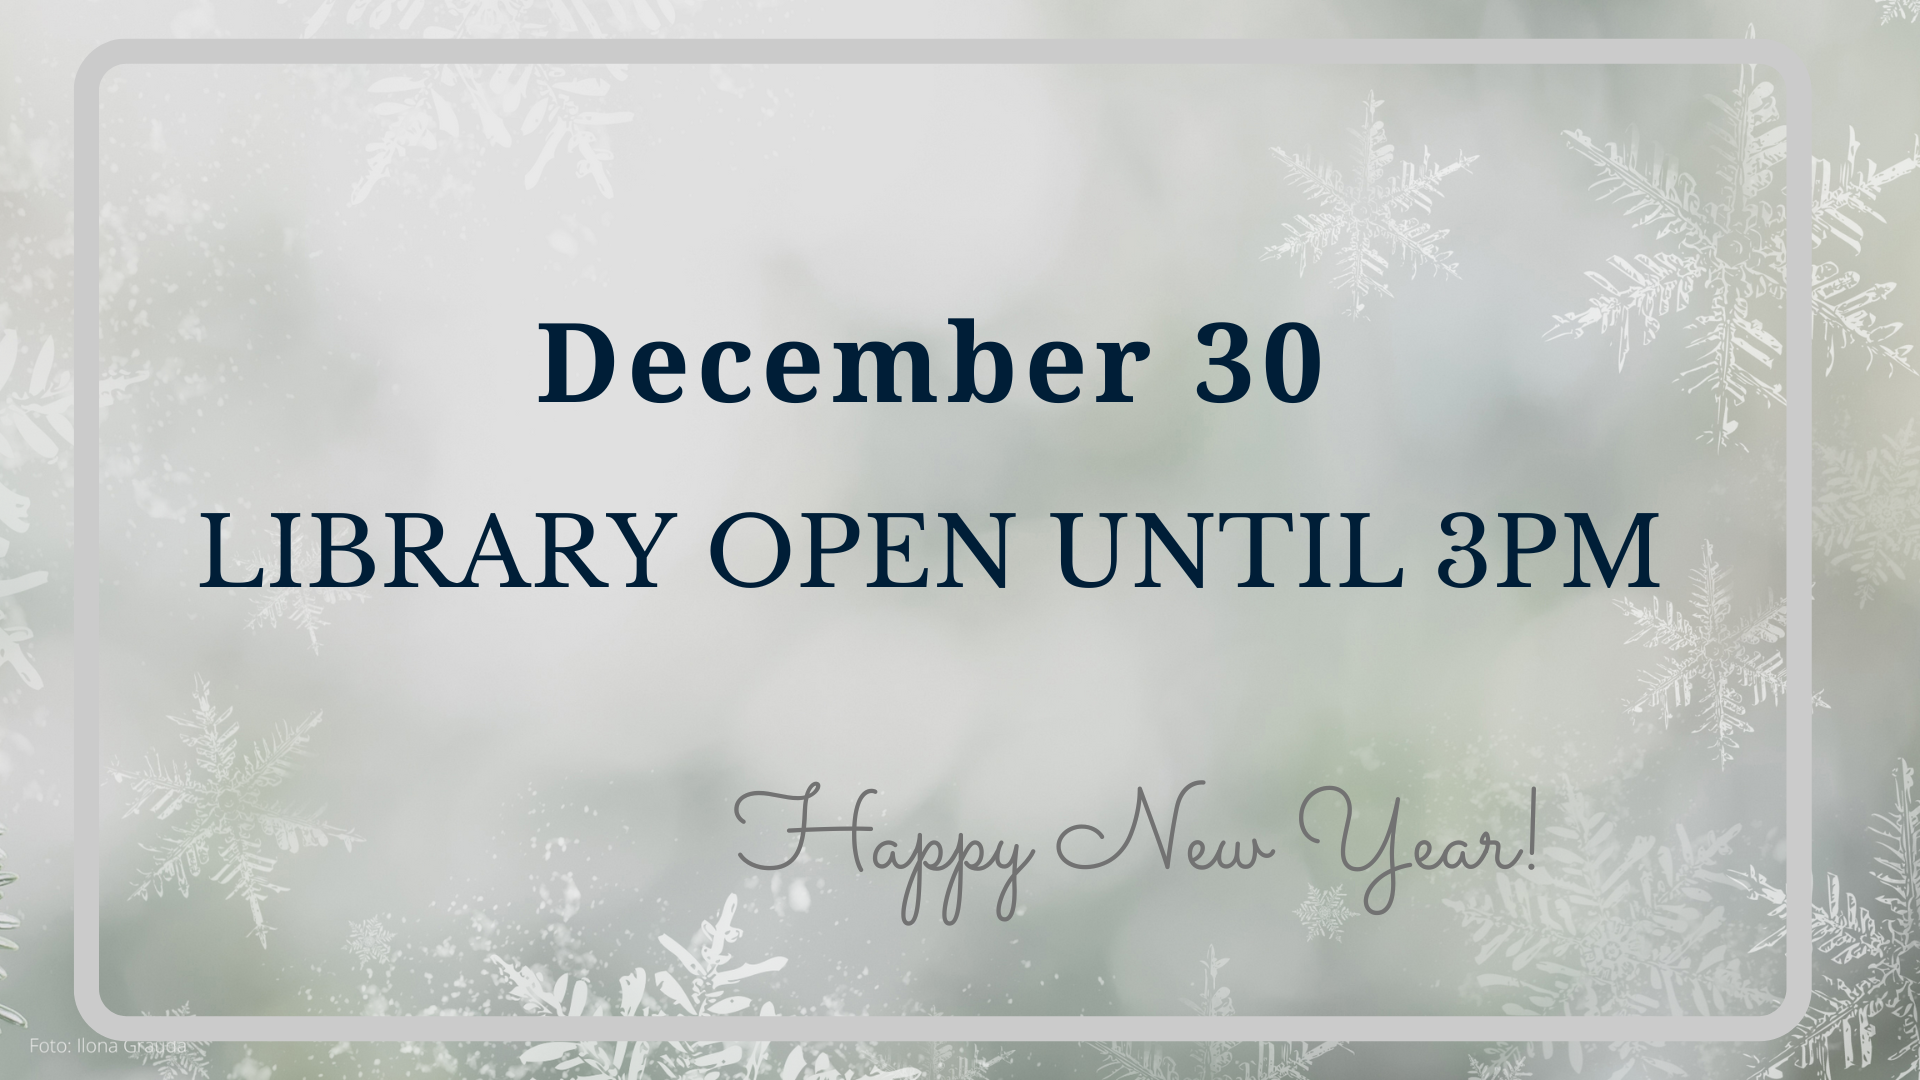 Fundamental Library of the Latvia University of Life Sciences and Technologies on Friday 30 December 2022 working hours 9am-3pm. Happy New Year!